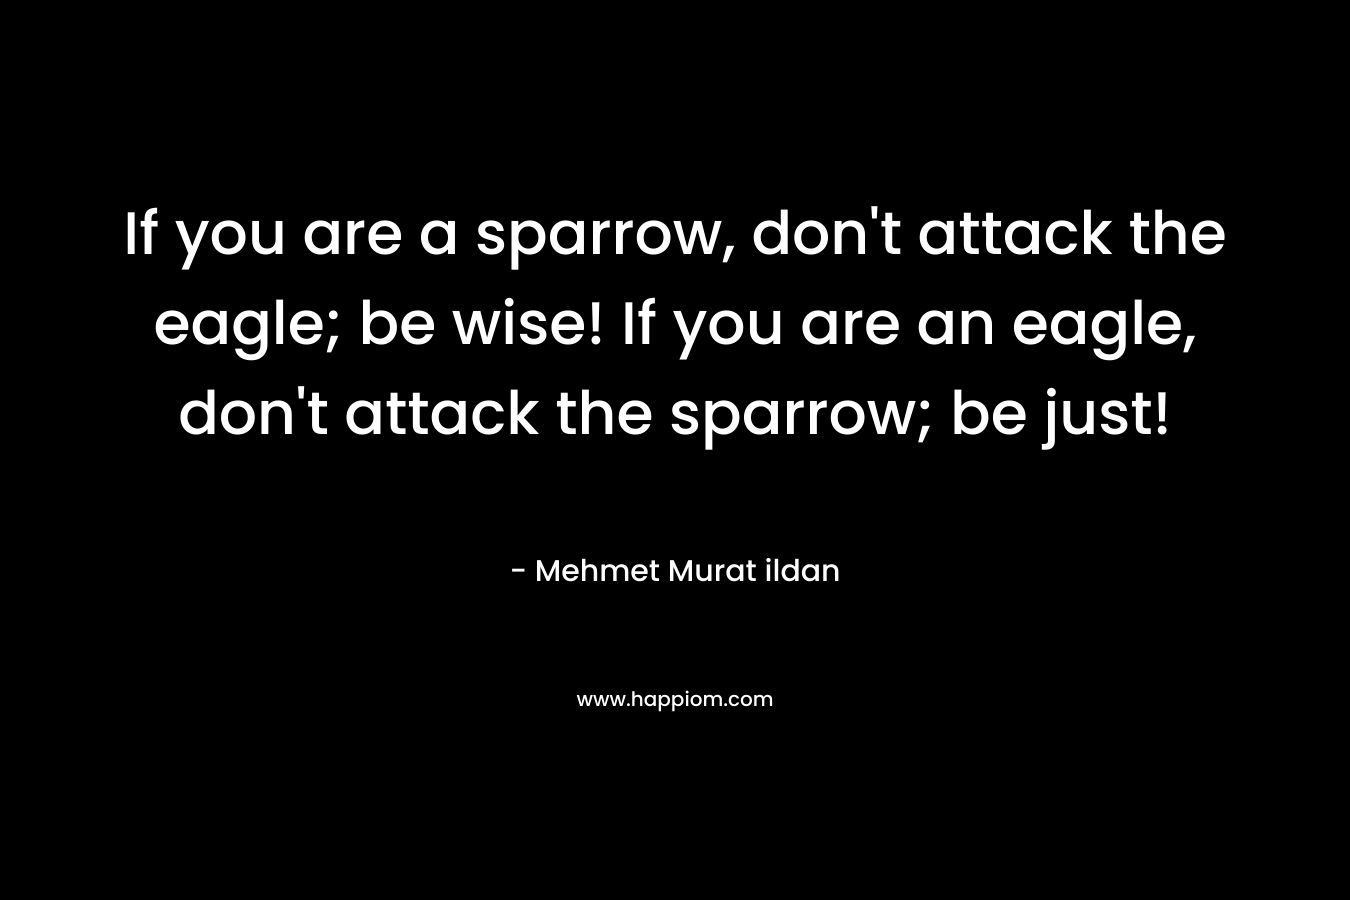 If you are a sparrow, don’t attack the eagle; be wise! If you are an eagle, don’t attack the sparrow; be just! – Mehmet Murat ildan